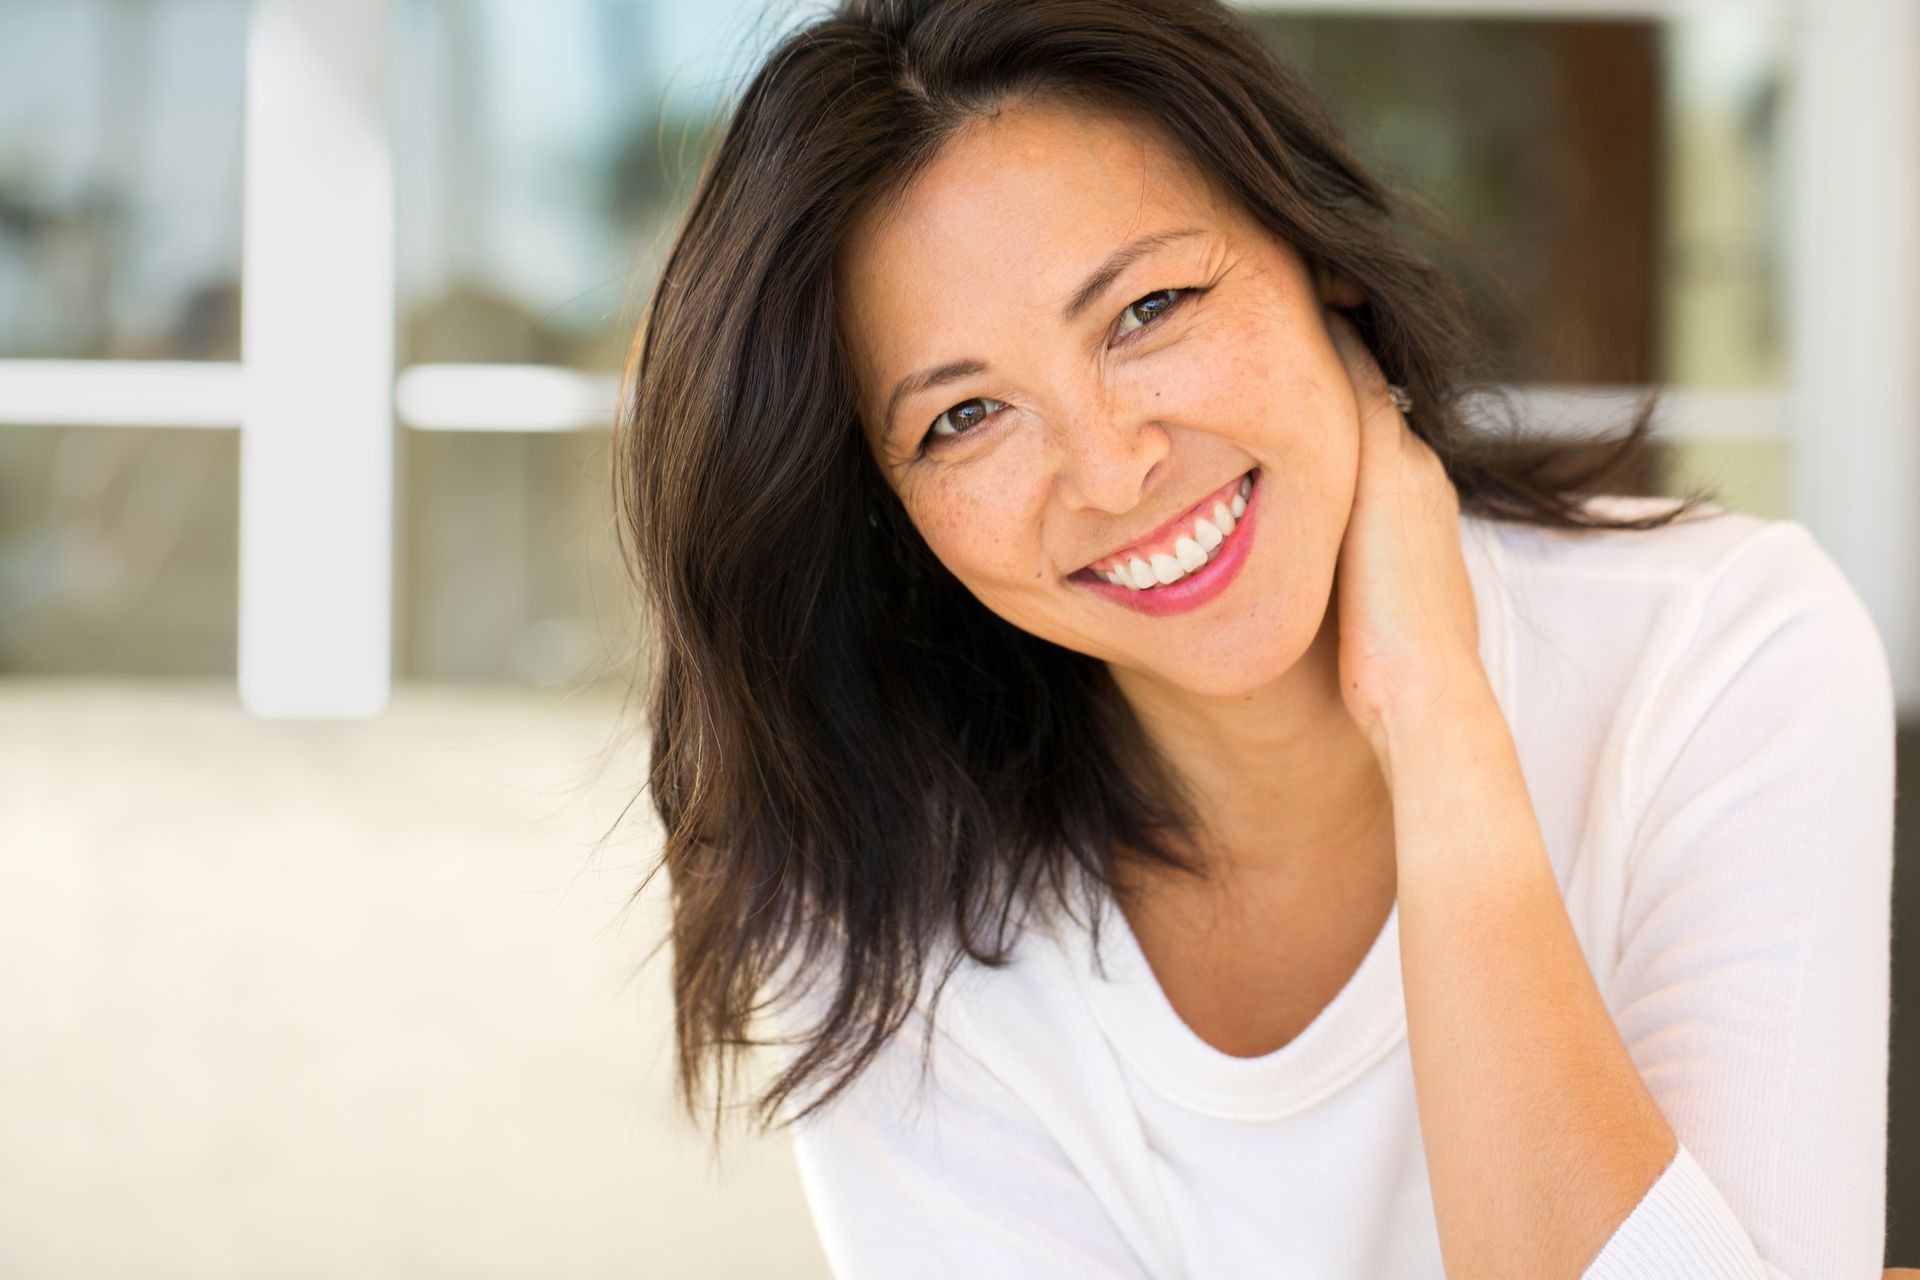 women smiling with white teeth